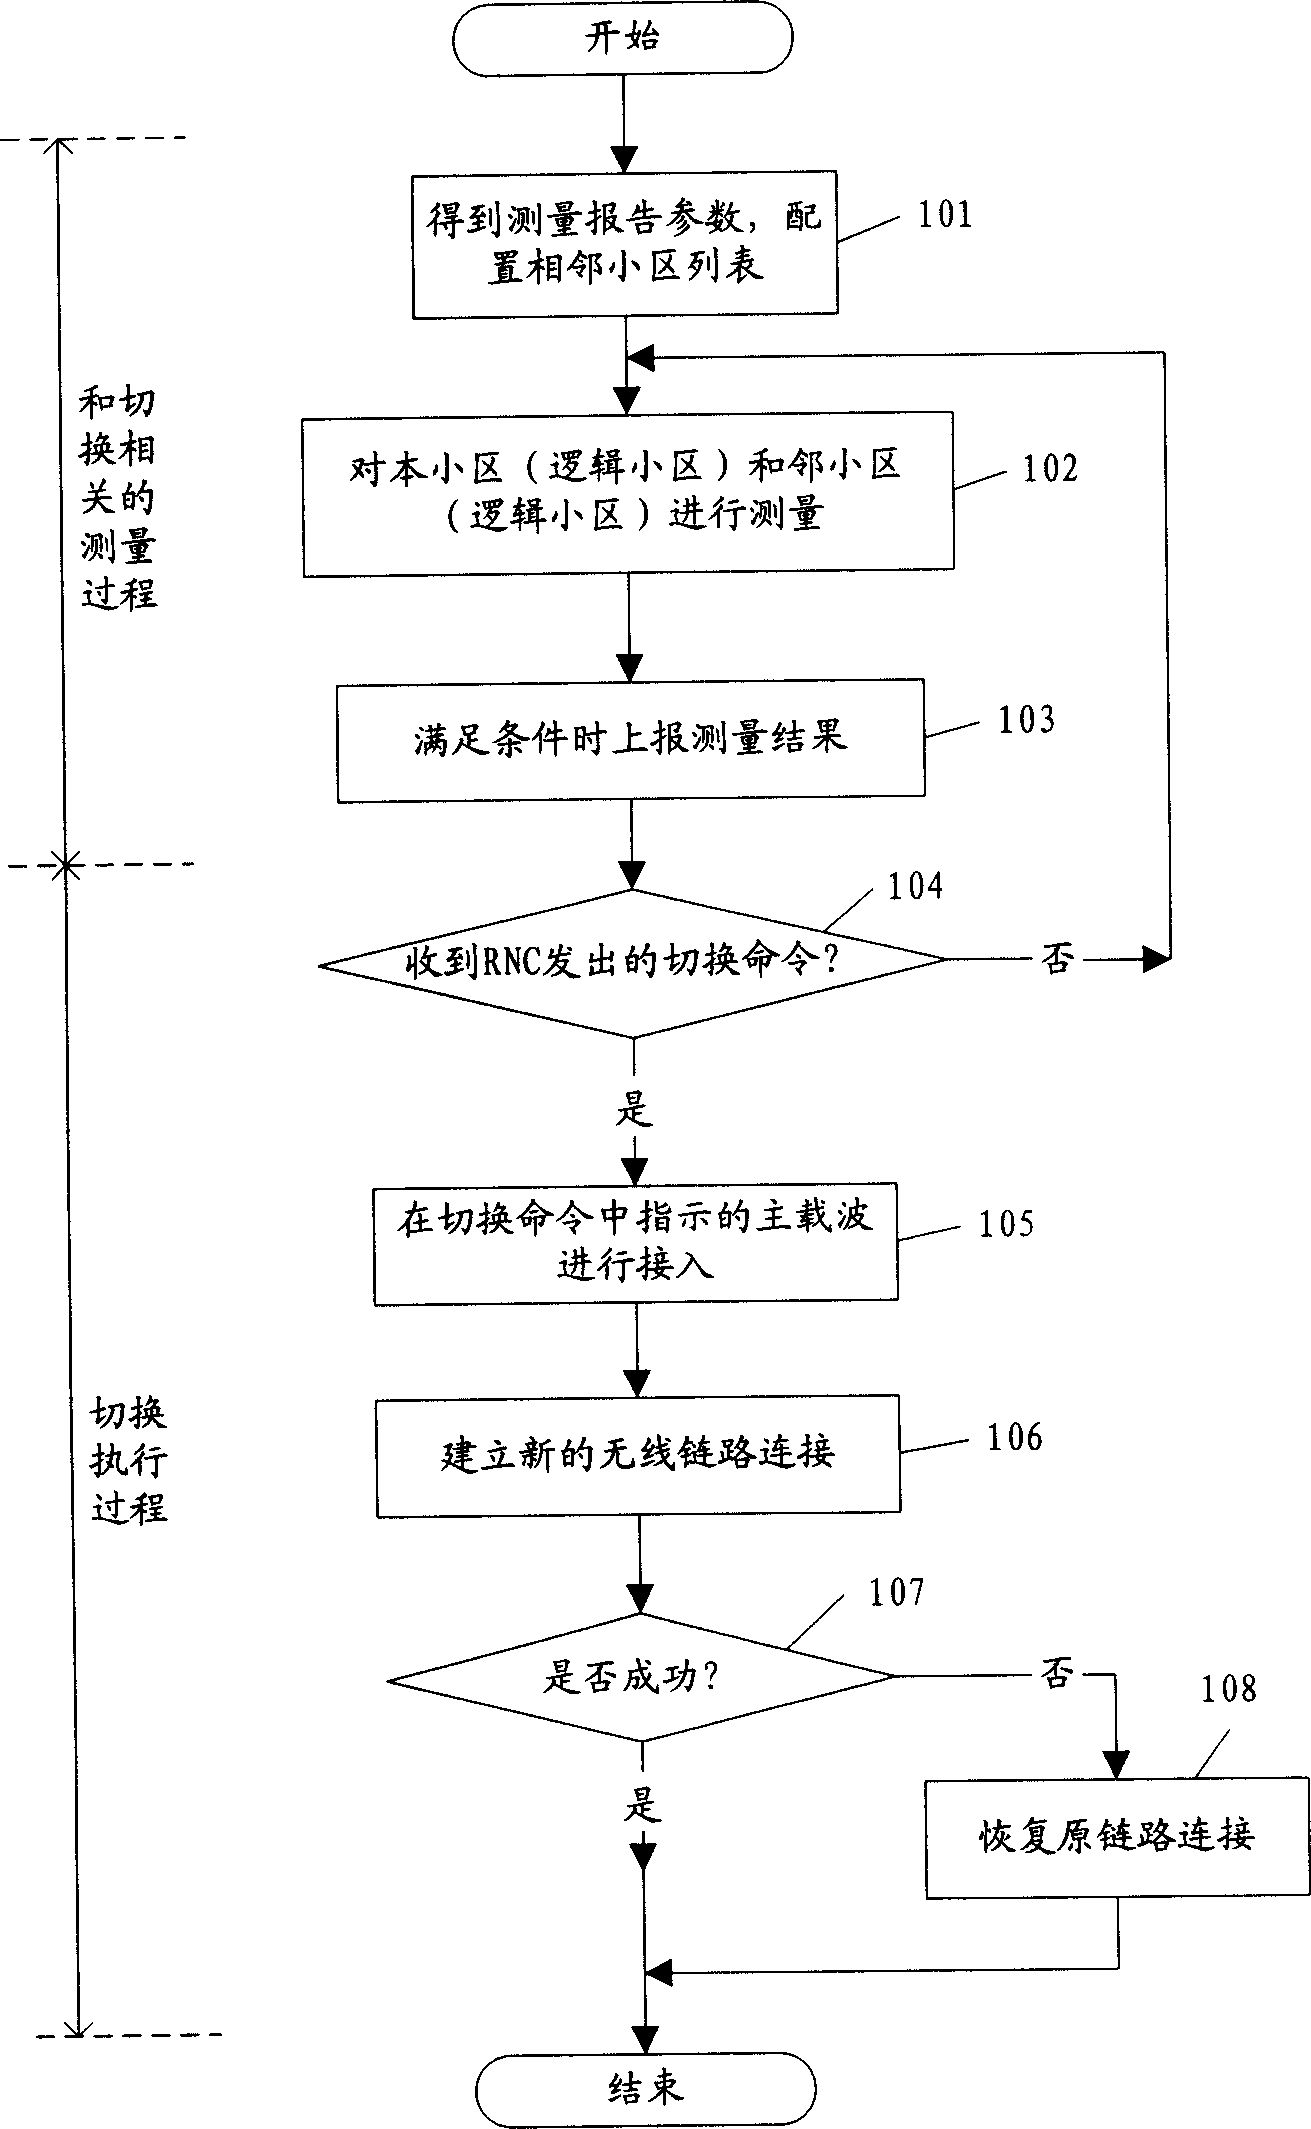 Switchover controll method of multiple frequency points system